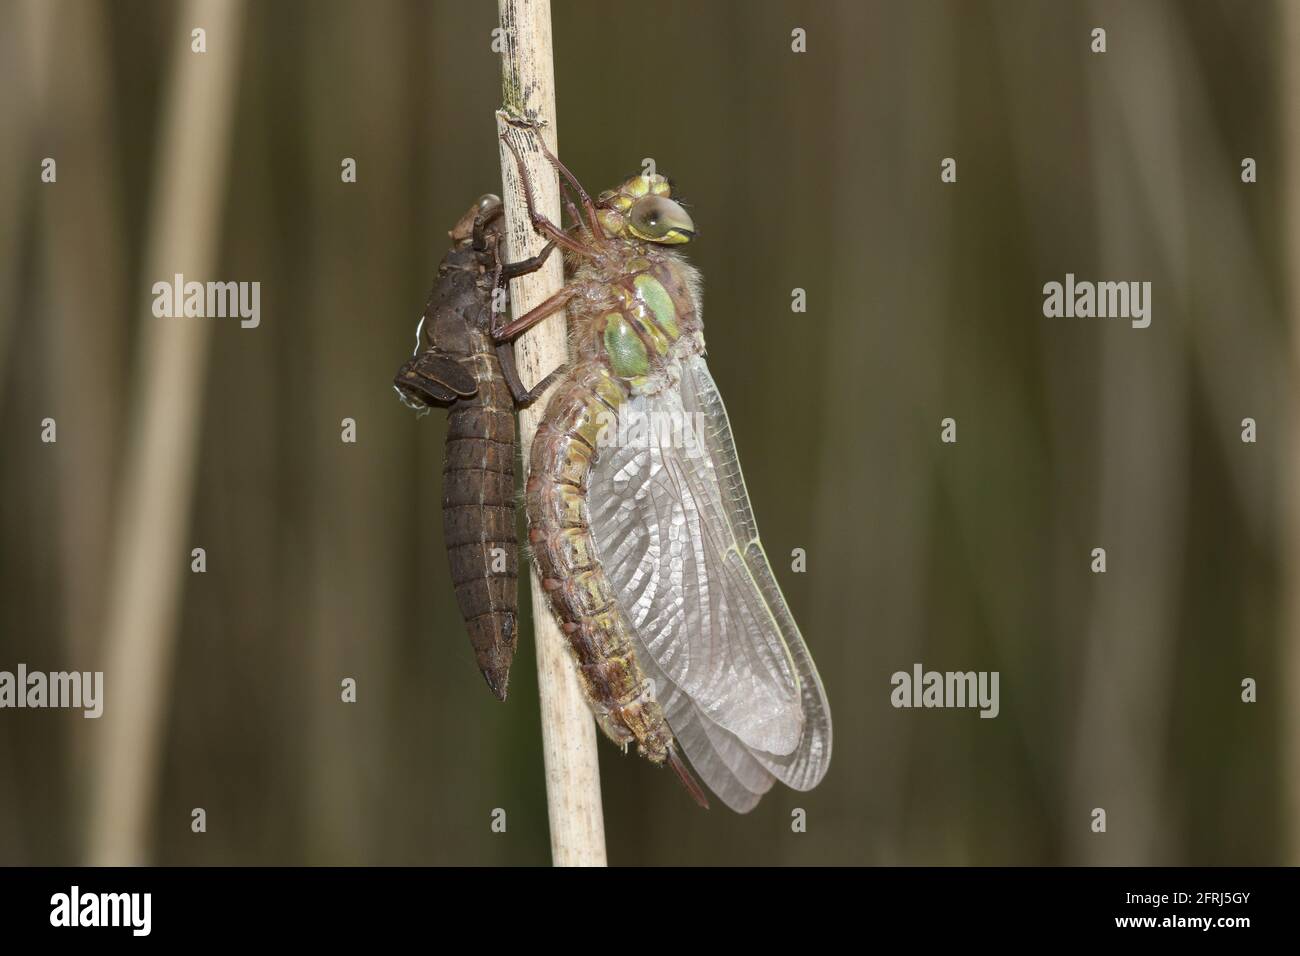 dragonfly, hairy dragonfly, insect, animal, wildlife, nature, brachytron pratense, larval case, reed, emerged, exuvia, pond, outdoors, macro, wild, pr Stock Photo